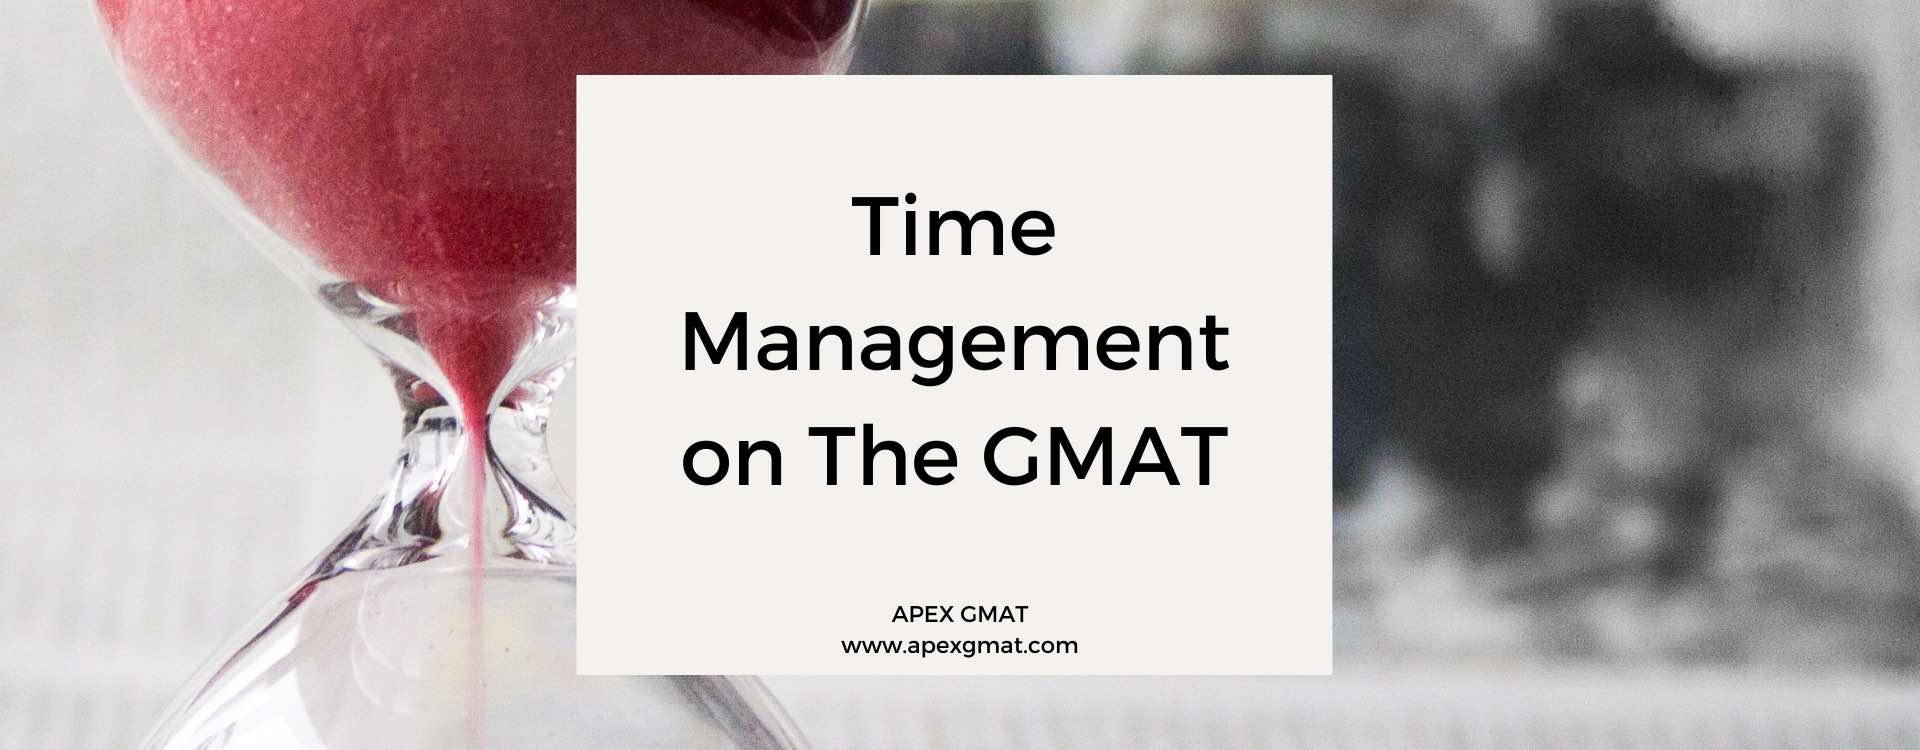 Time Management on The GMAT